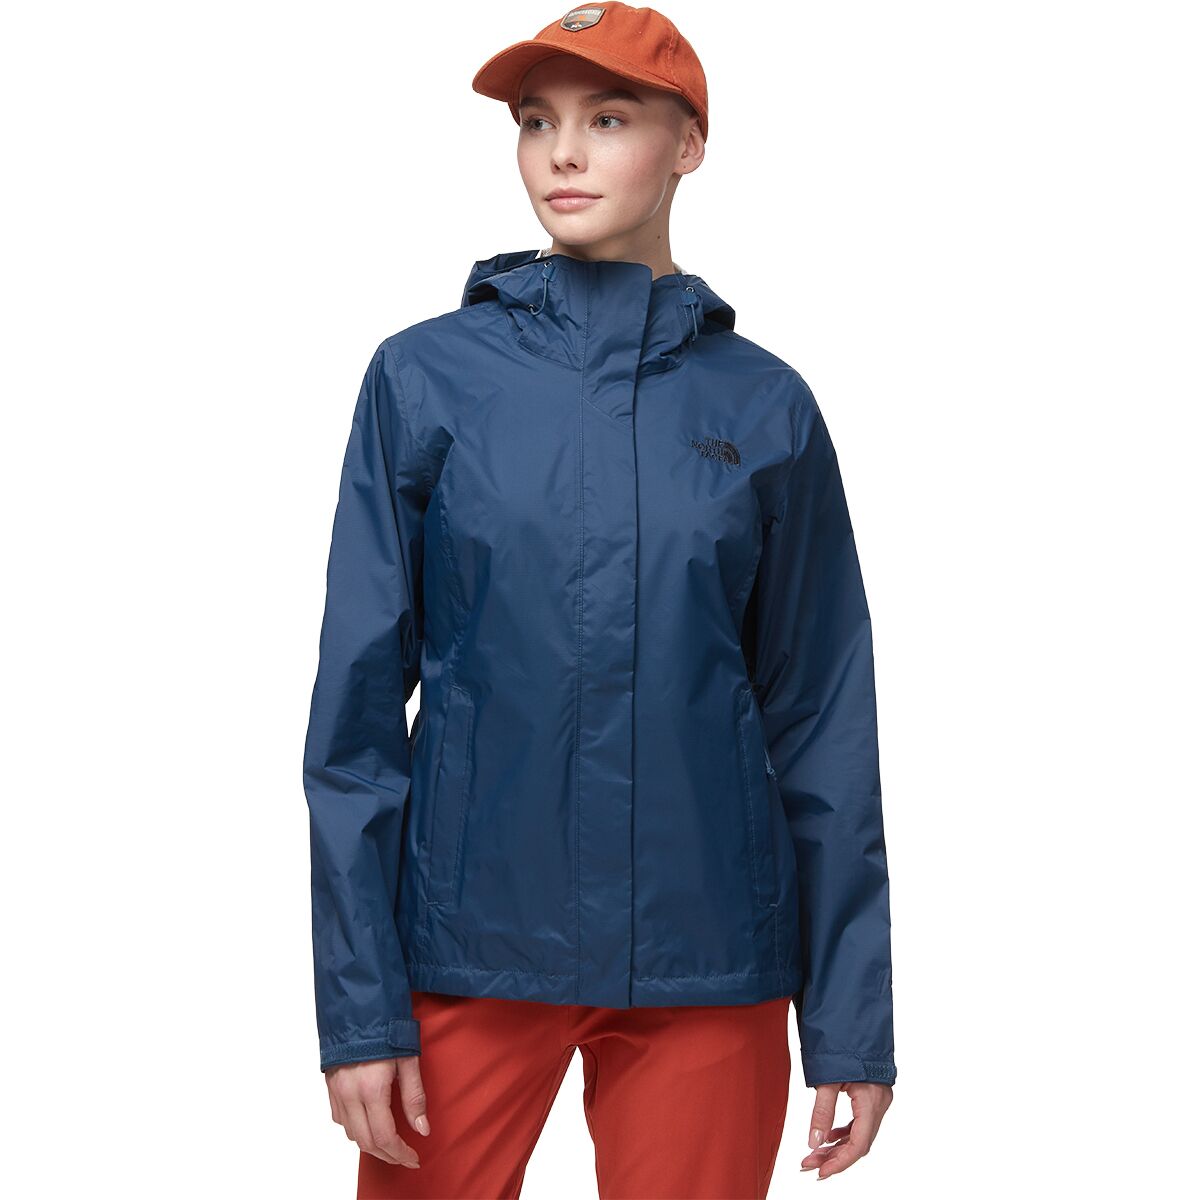 The North Face Venture 2 Jacket - Women's | Backcountry.com